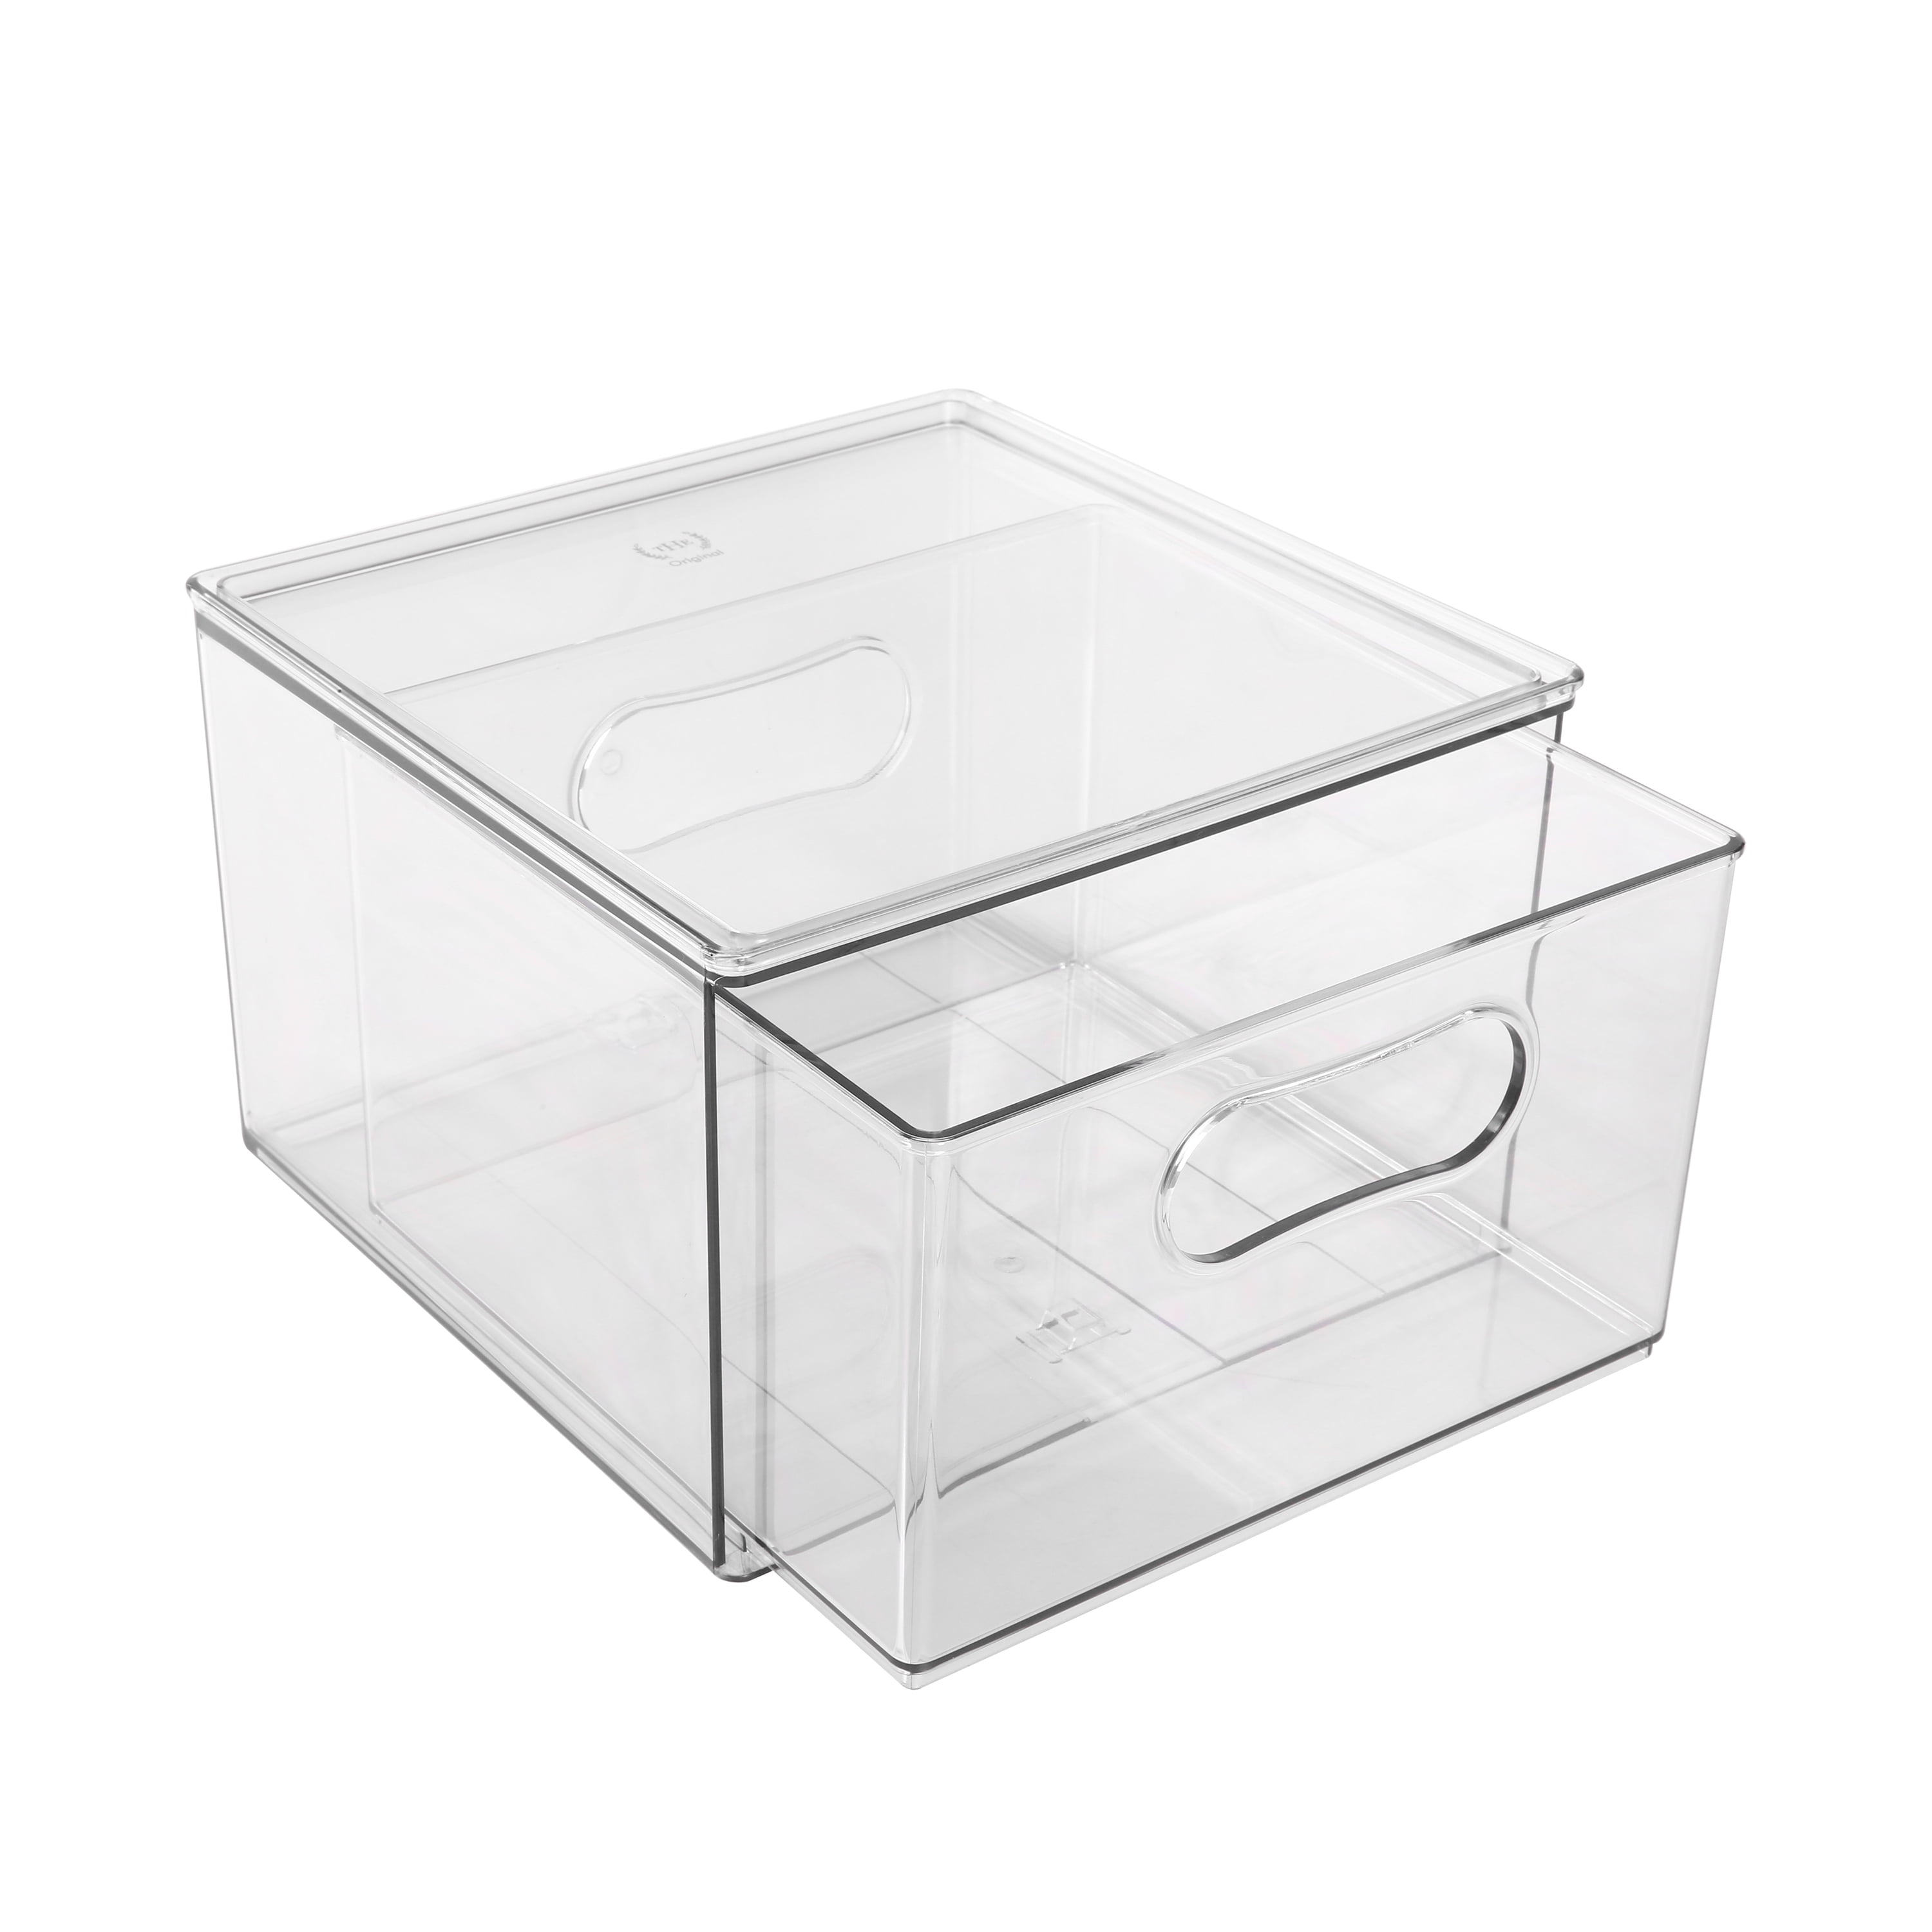 The Home Edit 2-3/4 x 4-1/4 x 2-1/2 Bin Divider - Clear - Small - S (Small) 04350C